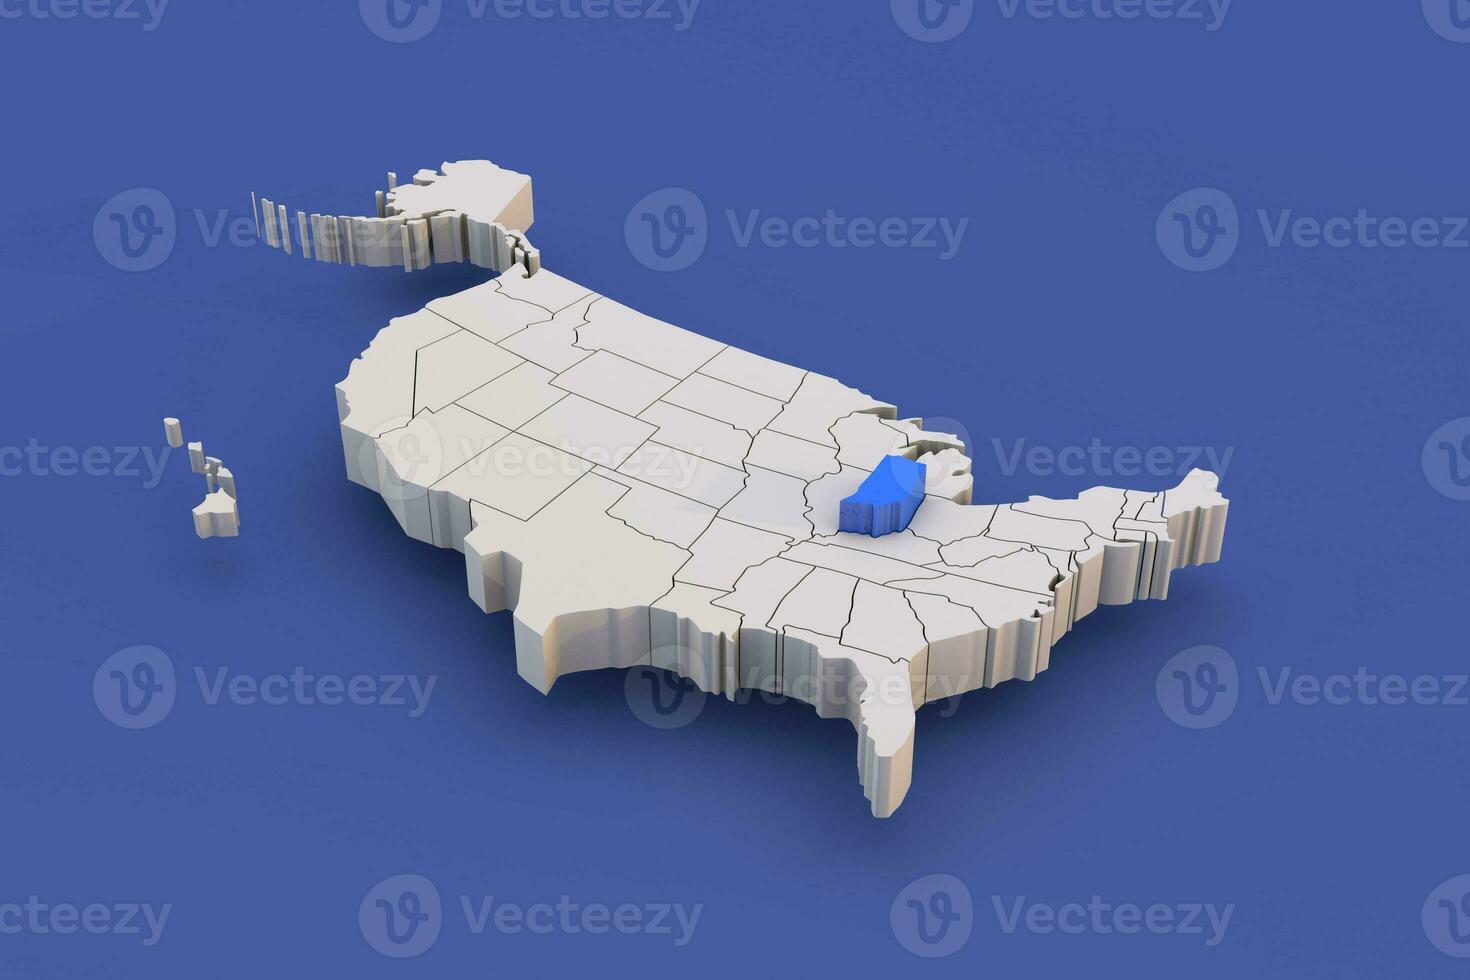 Indiana state of USA map with white states a 3D united states of america map photo